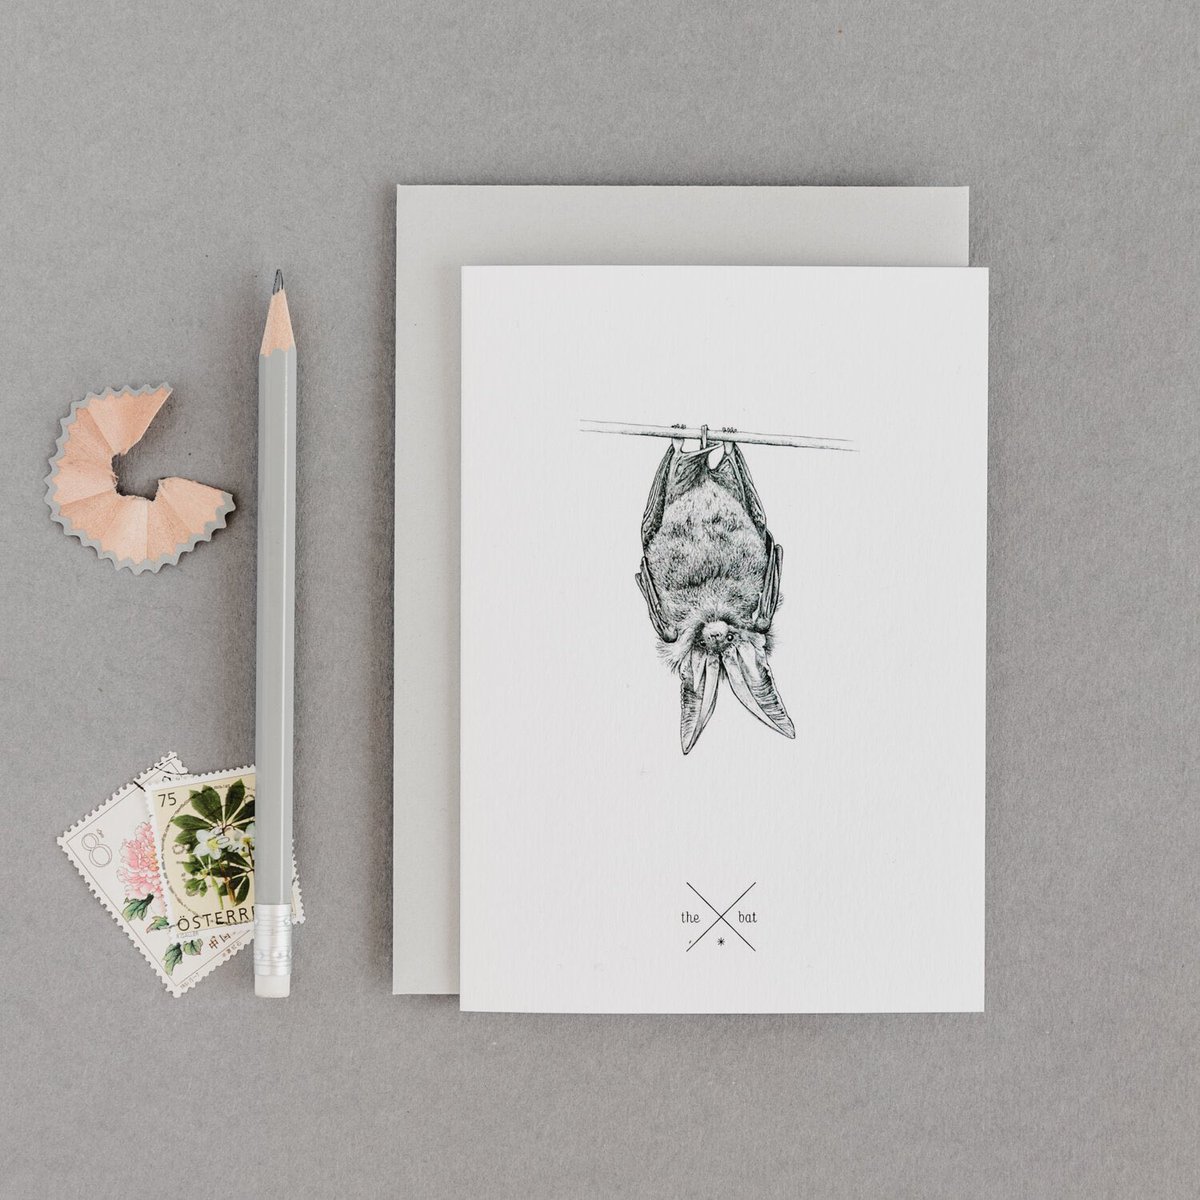 All our best selling bat products are now back in stock!!! With 10% donated to bat conservation, they are more than just gifts! 🦇 creaturecandy.co.uk/bat-products #bats #bat #batgifts #batprint #batnotebook #batcard #batconservation @_BCT_ @vincentwildlife